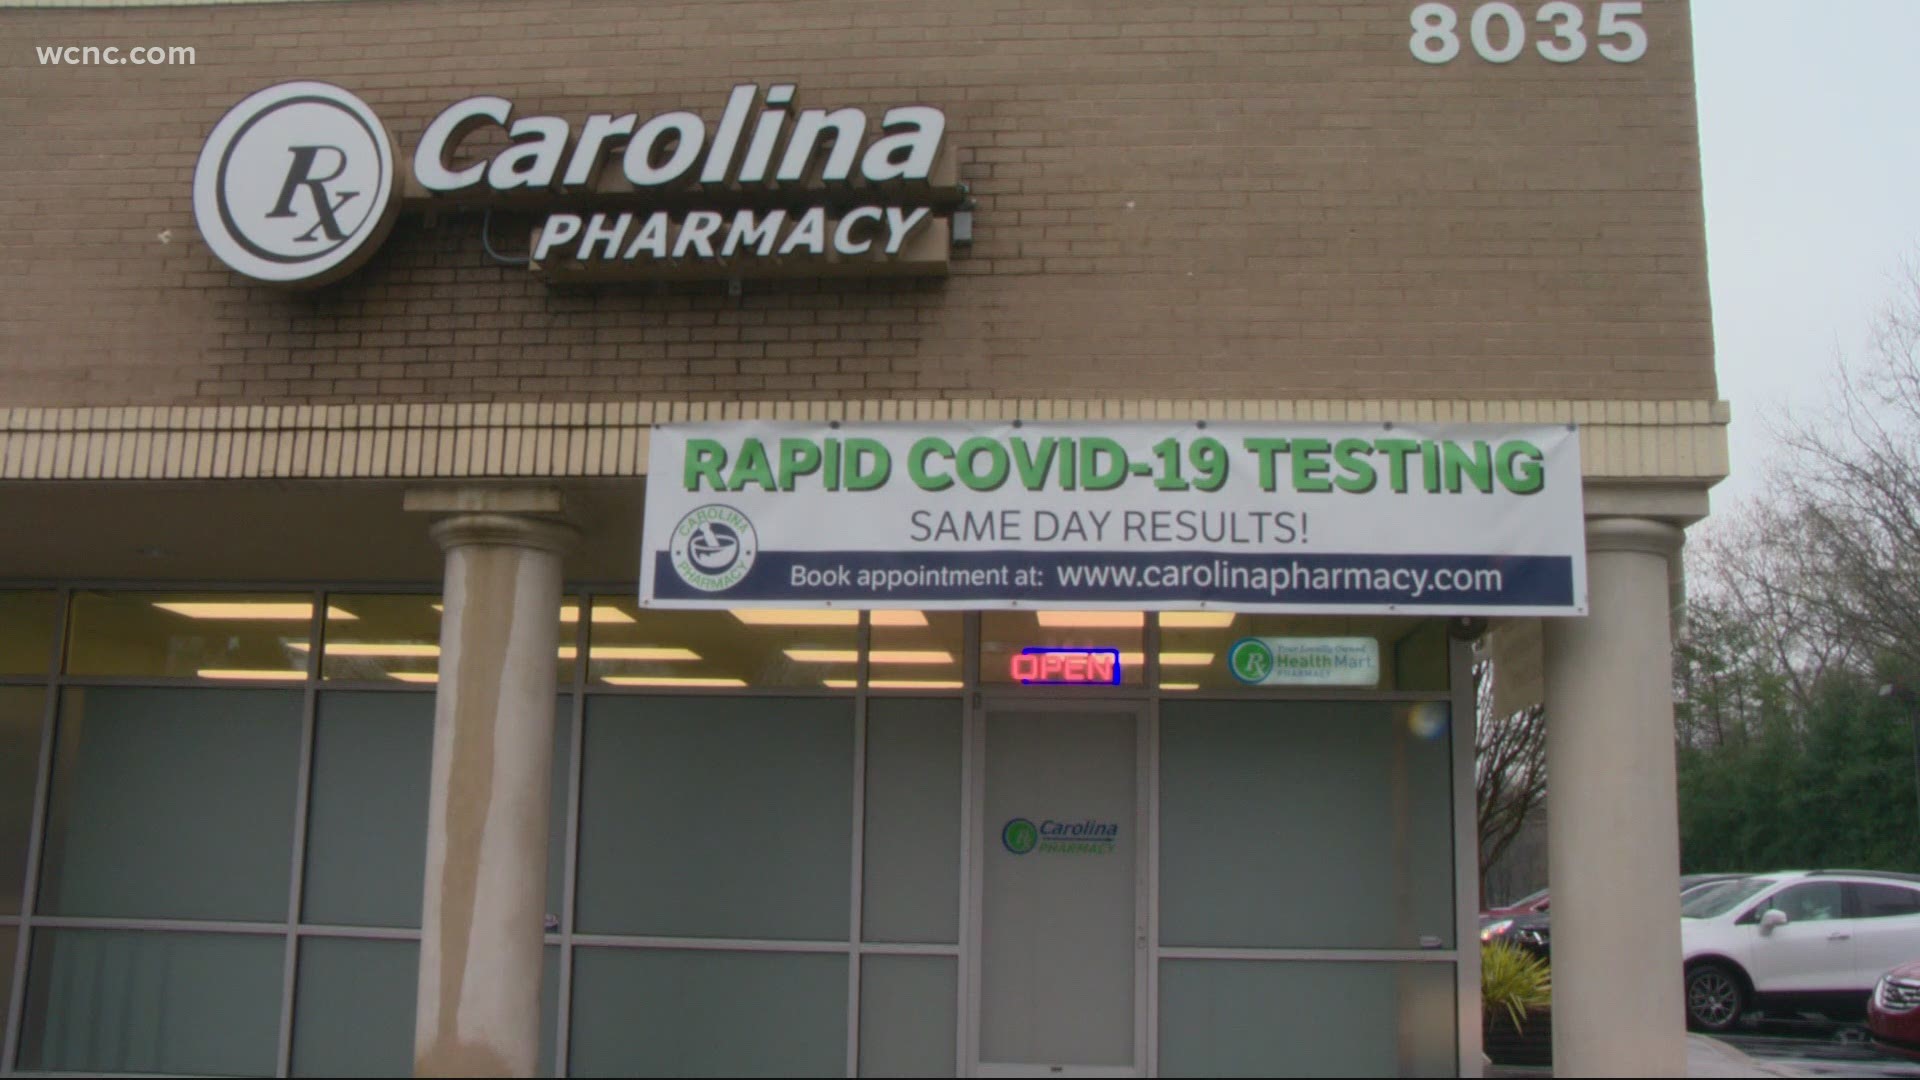 Independent pharmacies eager to help distribute COVID-19 vaccine